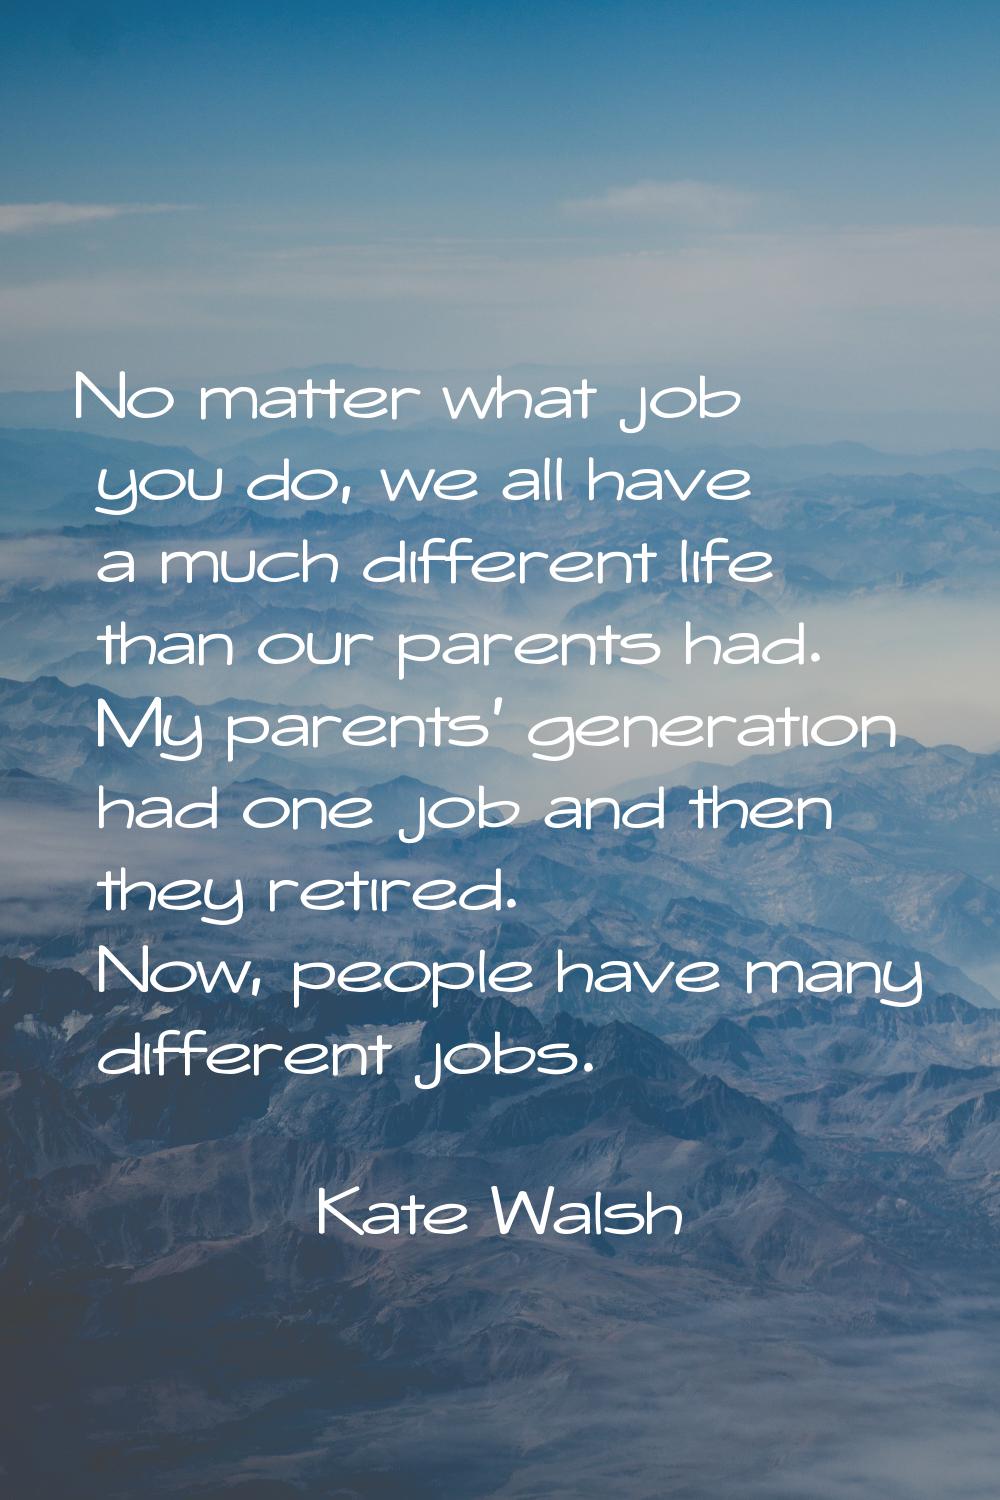 No matter what job you do, we all have a much different life than our parents had. My parents' gene